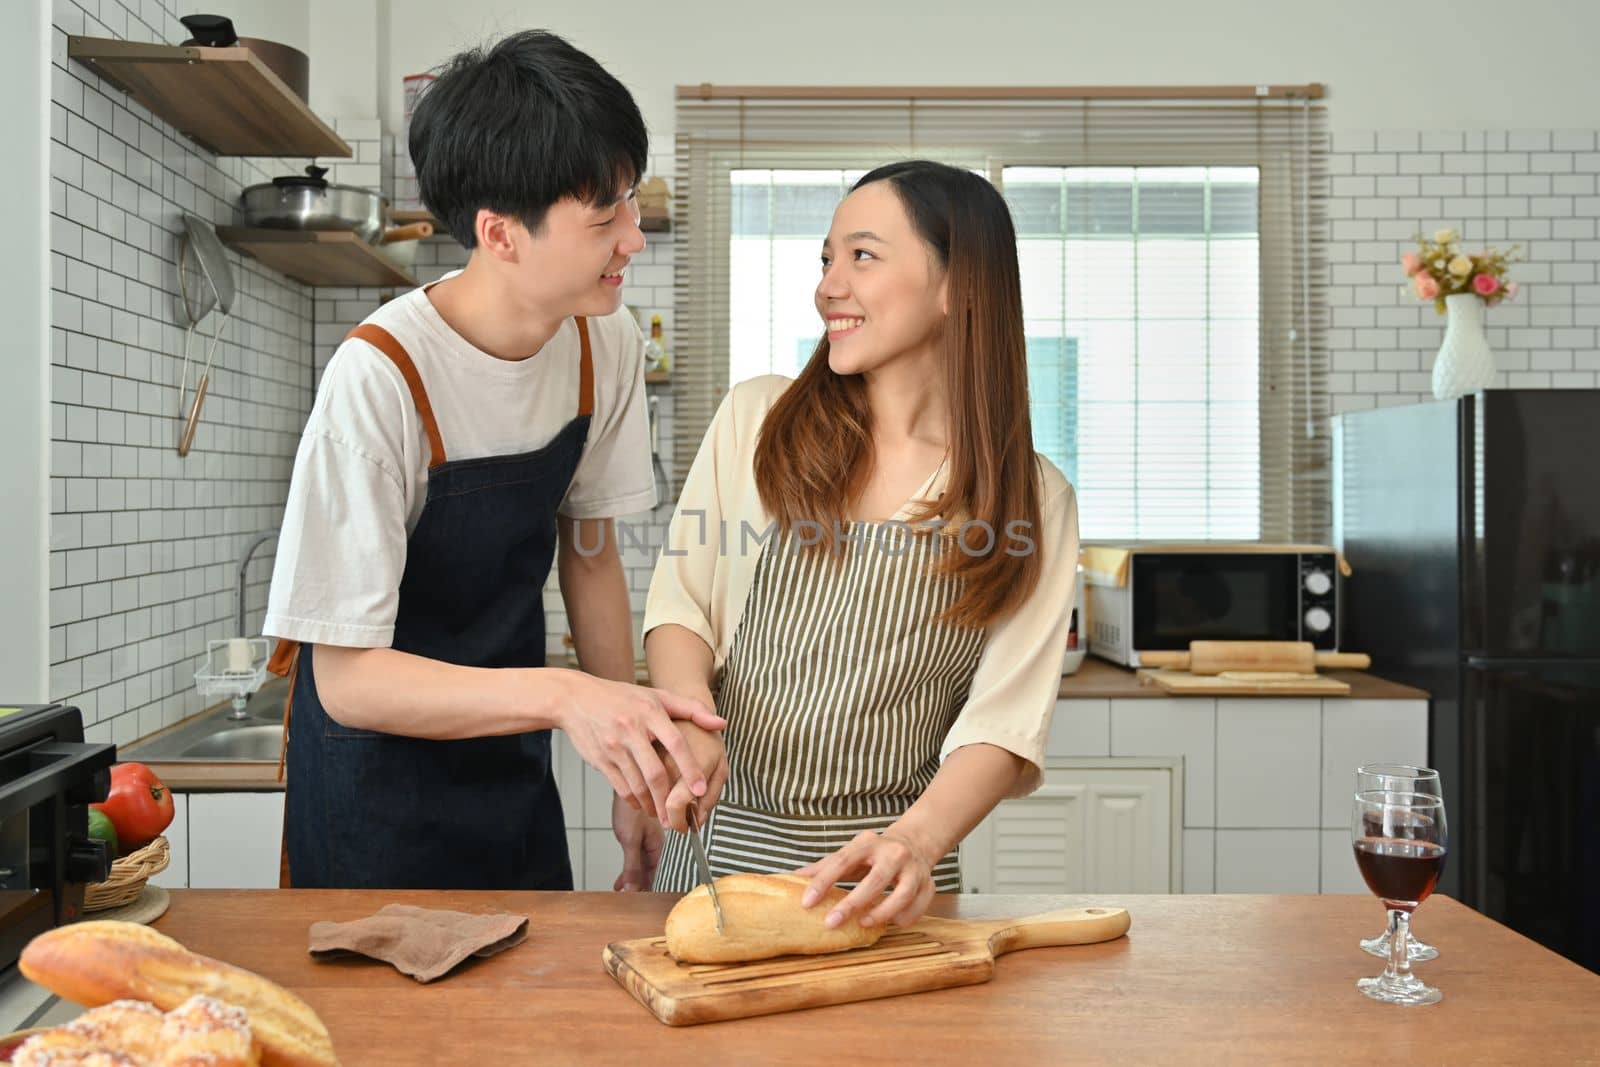 Joyful young couple preparing homemade pastry on wooden table in kitchen. Love, relationship, people and family by prathanchorruangsak